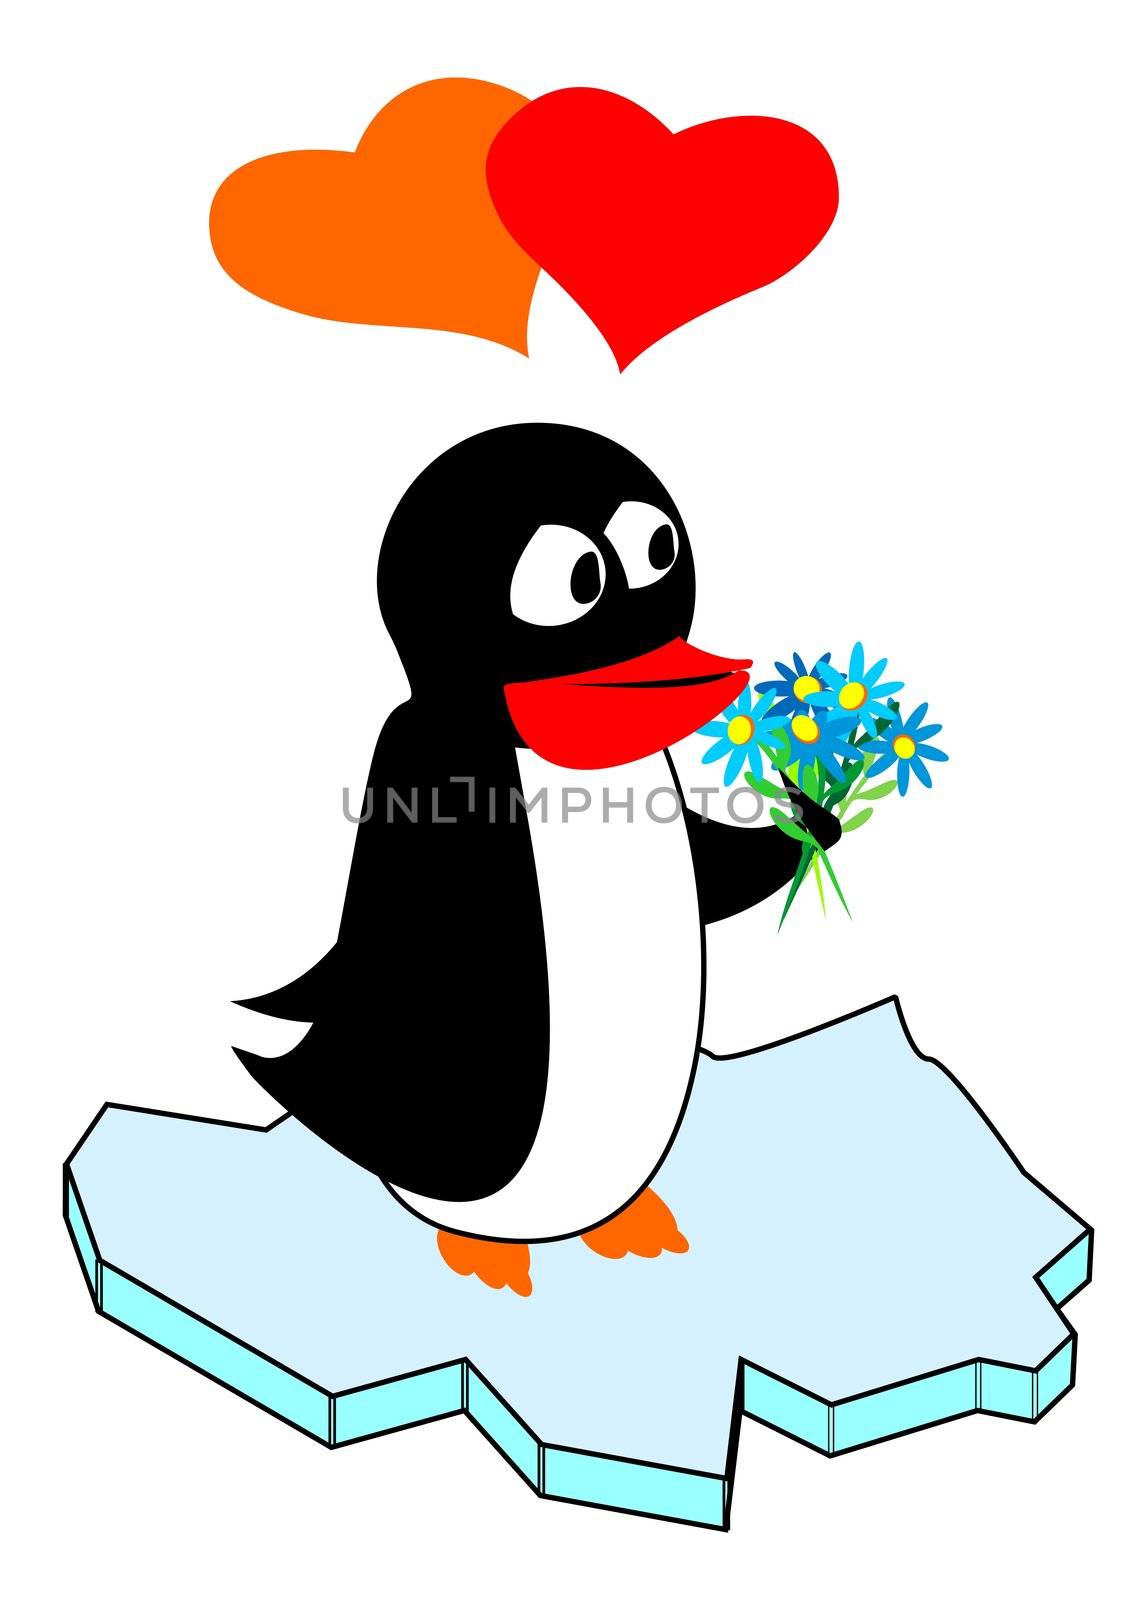 penguin in love, standing with a bunch of flowers on ice, can be used for birthday cards, Valentines and other congratulations